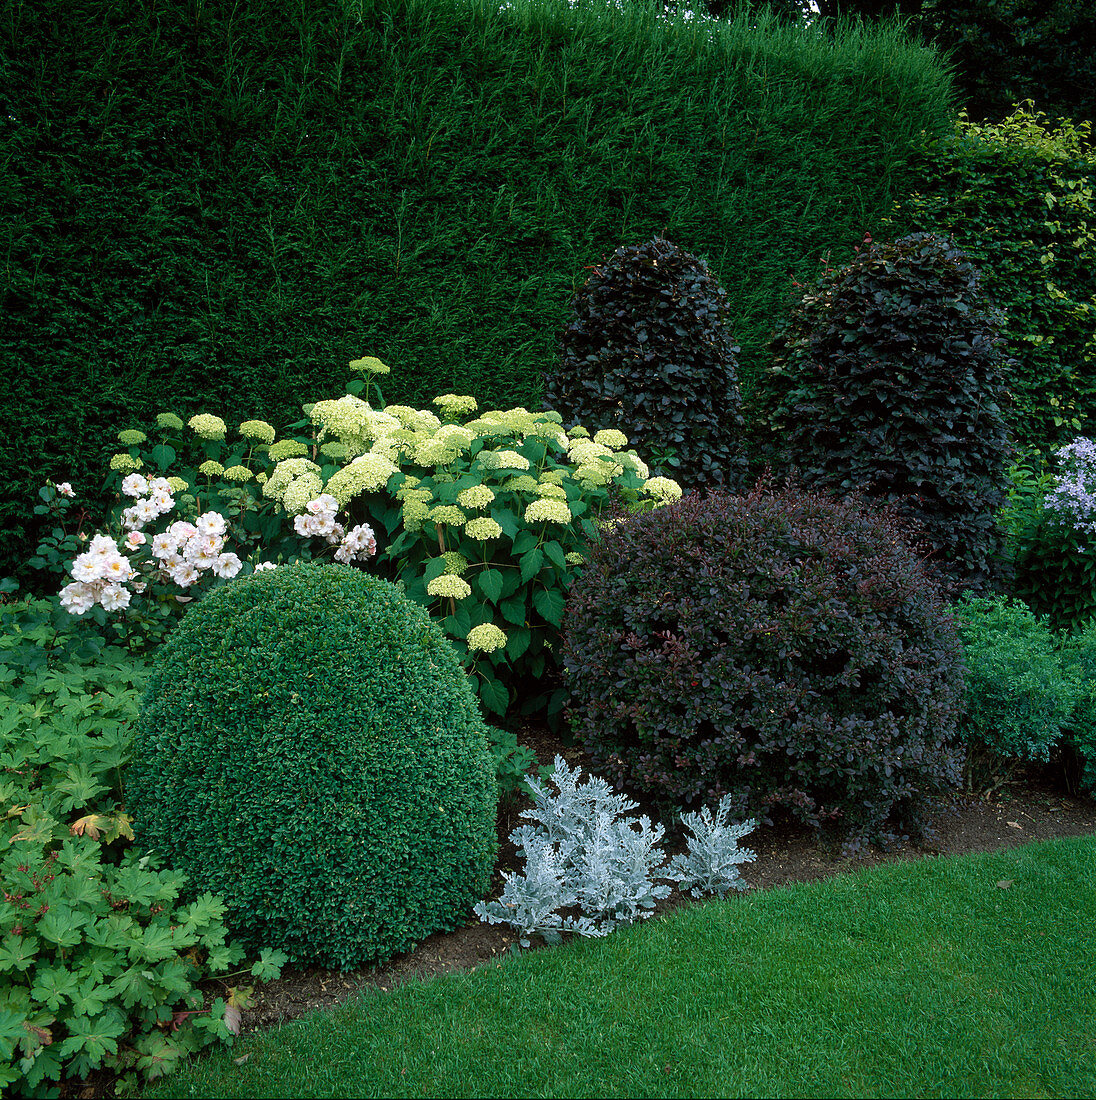 Hydrangea 'Annabelle' (shrub hydrangea), rose 'Lady of the Dawn' (rose), Berberis (blood barberry) and Buxus (box) cut as a ball, Fagus (blood beech) - beech in bed in front of conifer hedge